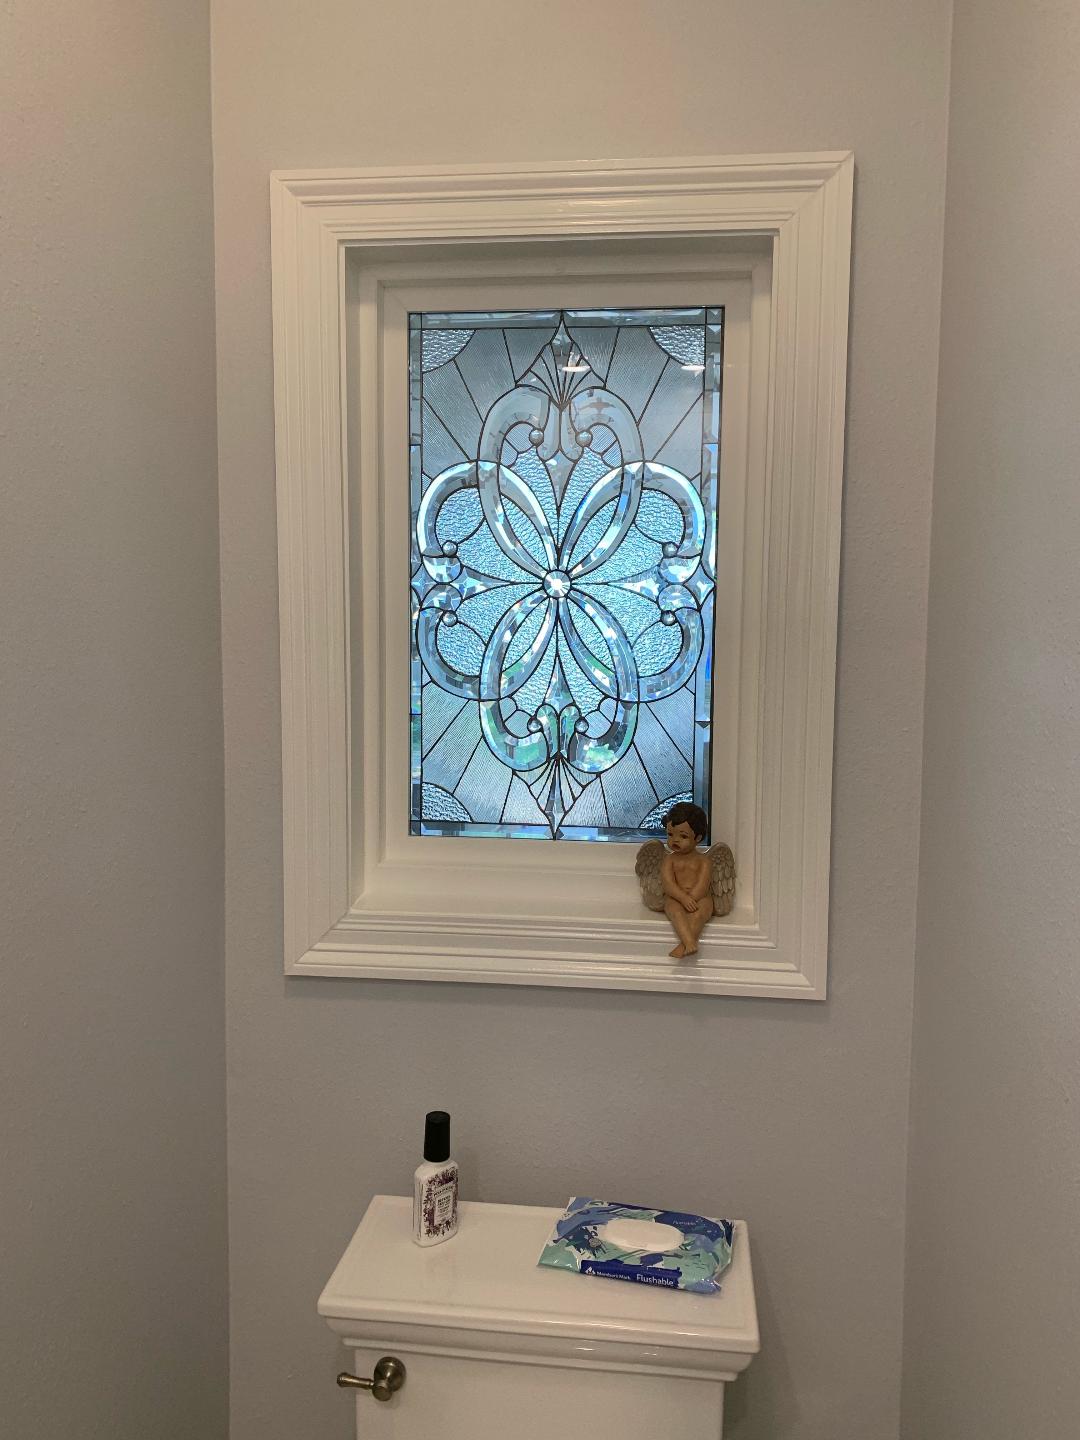 The lovely "Pacifica" All Clear Beveled Window Installed In A Client's Bathroom For Beauty And Light